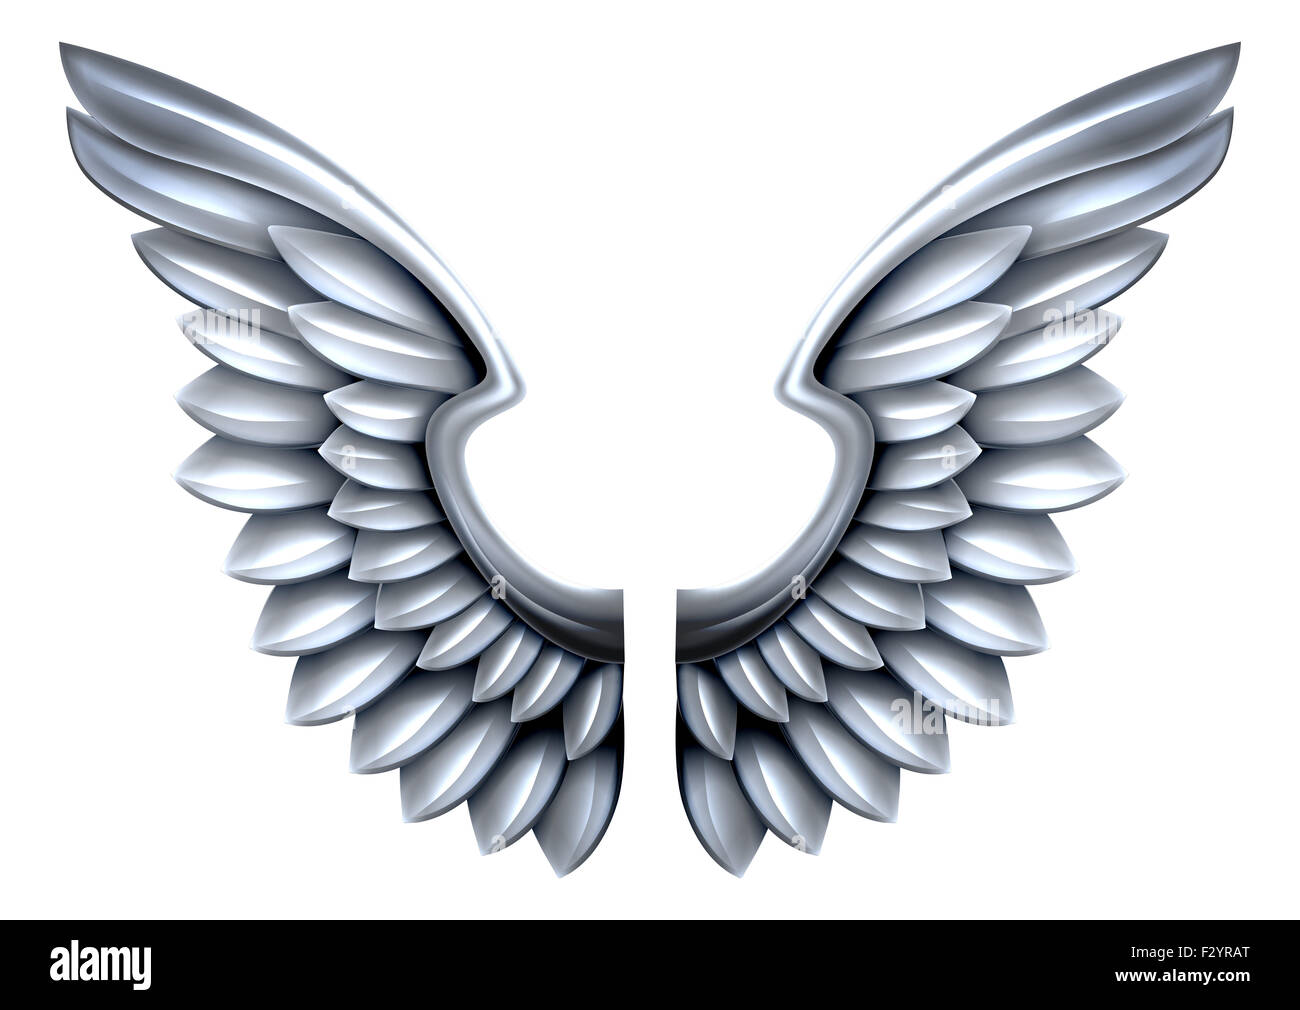 A pair of steel or silver shiny metal wings Stock Photo